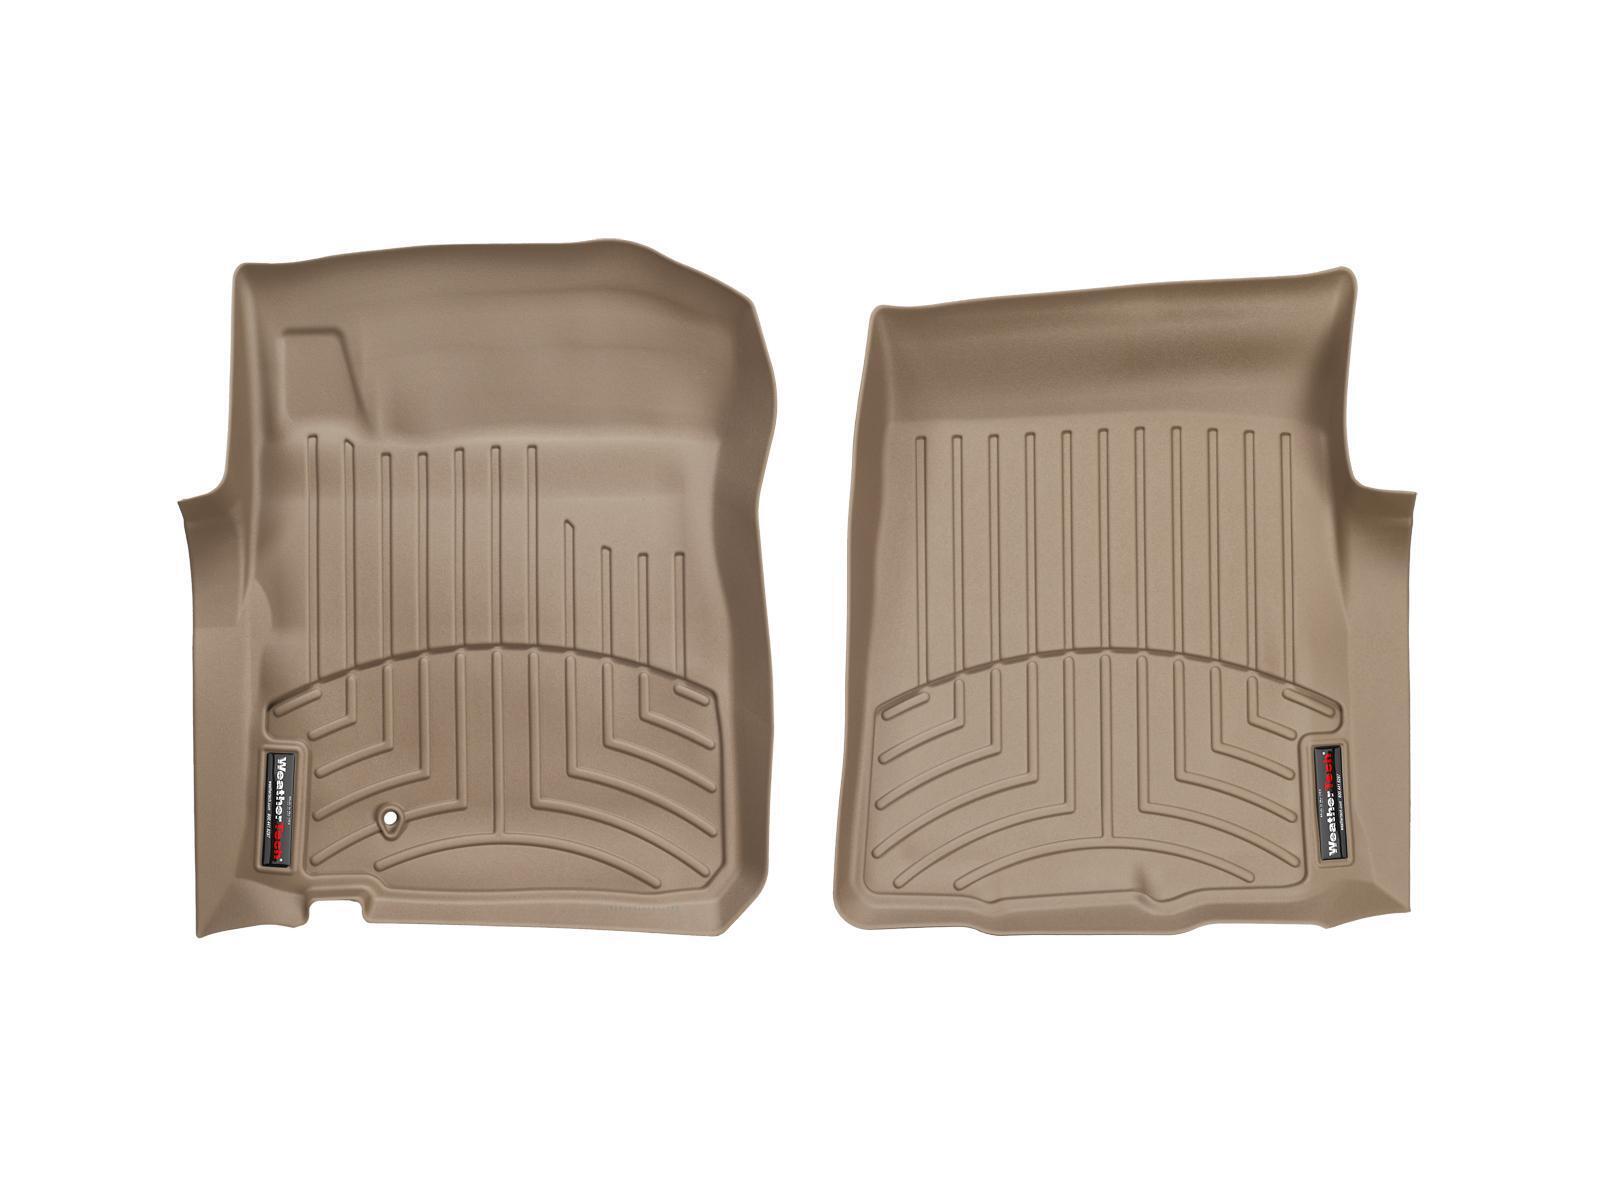 WeatherTech FloorLiner for 1997-2004 Ford F-150 Reg/Ext Cab - 1st Row, Tan